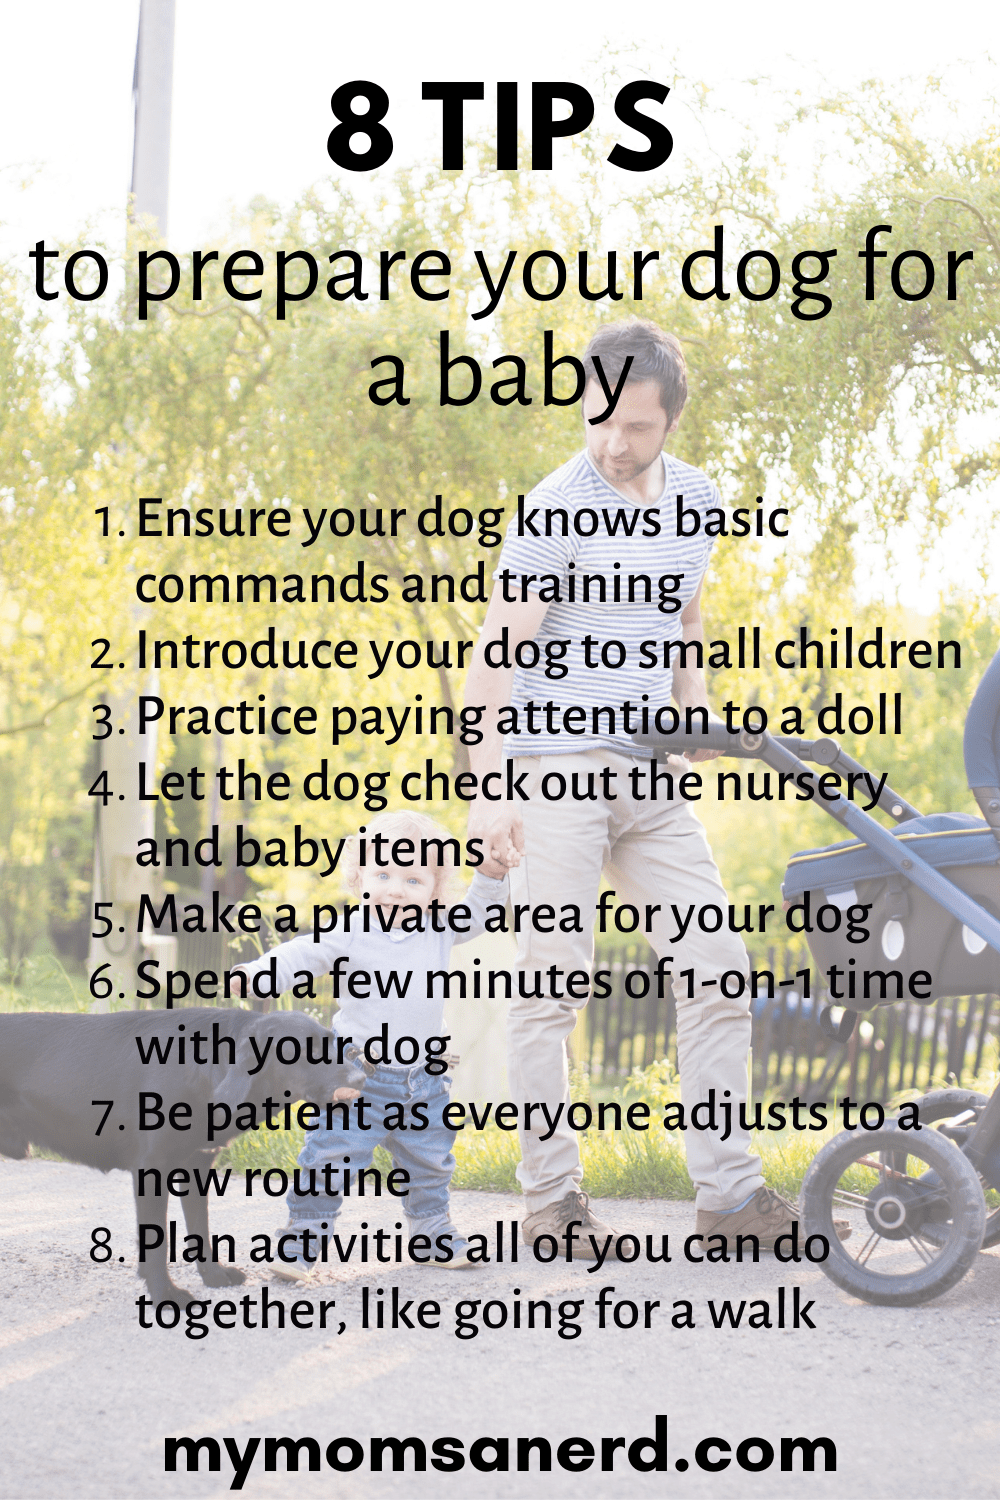 How to prepare your dog for a baby